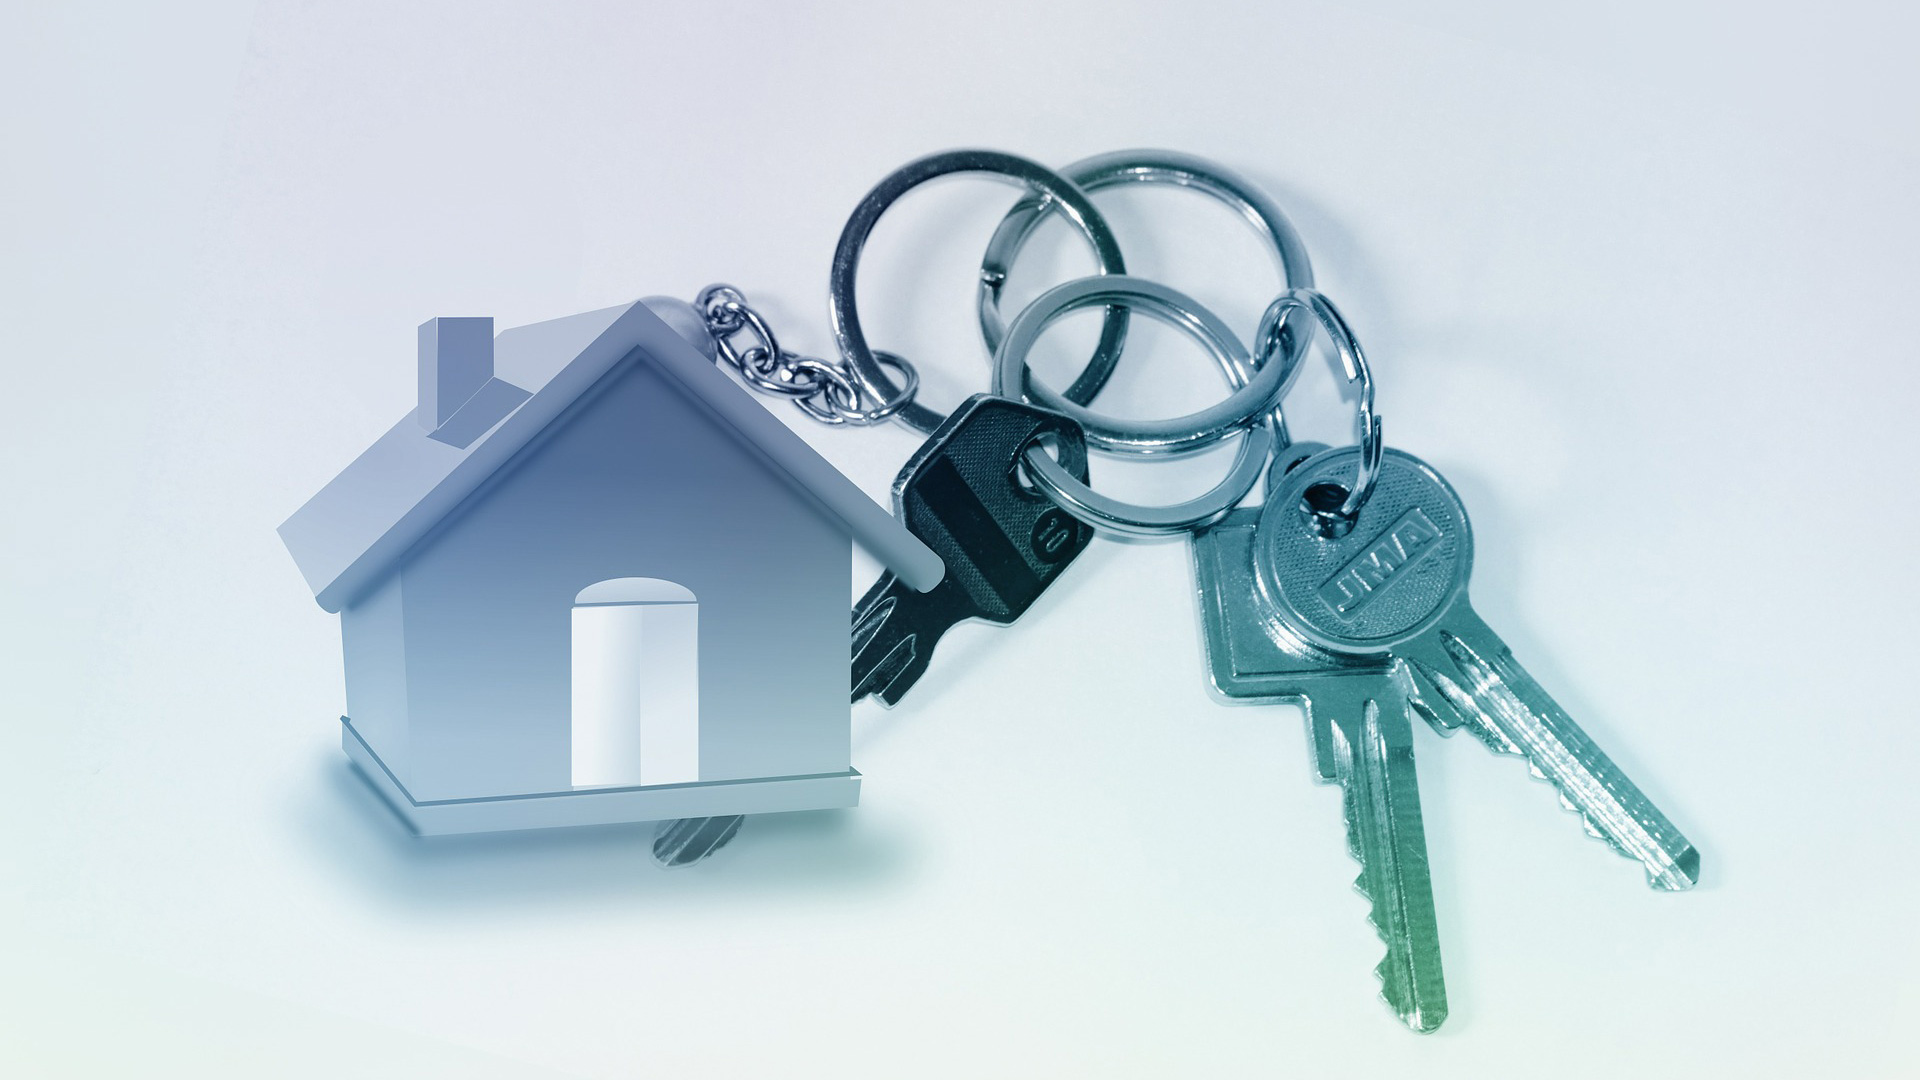 A model of a house and some keys, green and blue on a white background